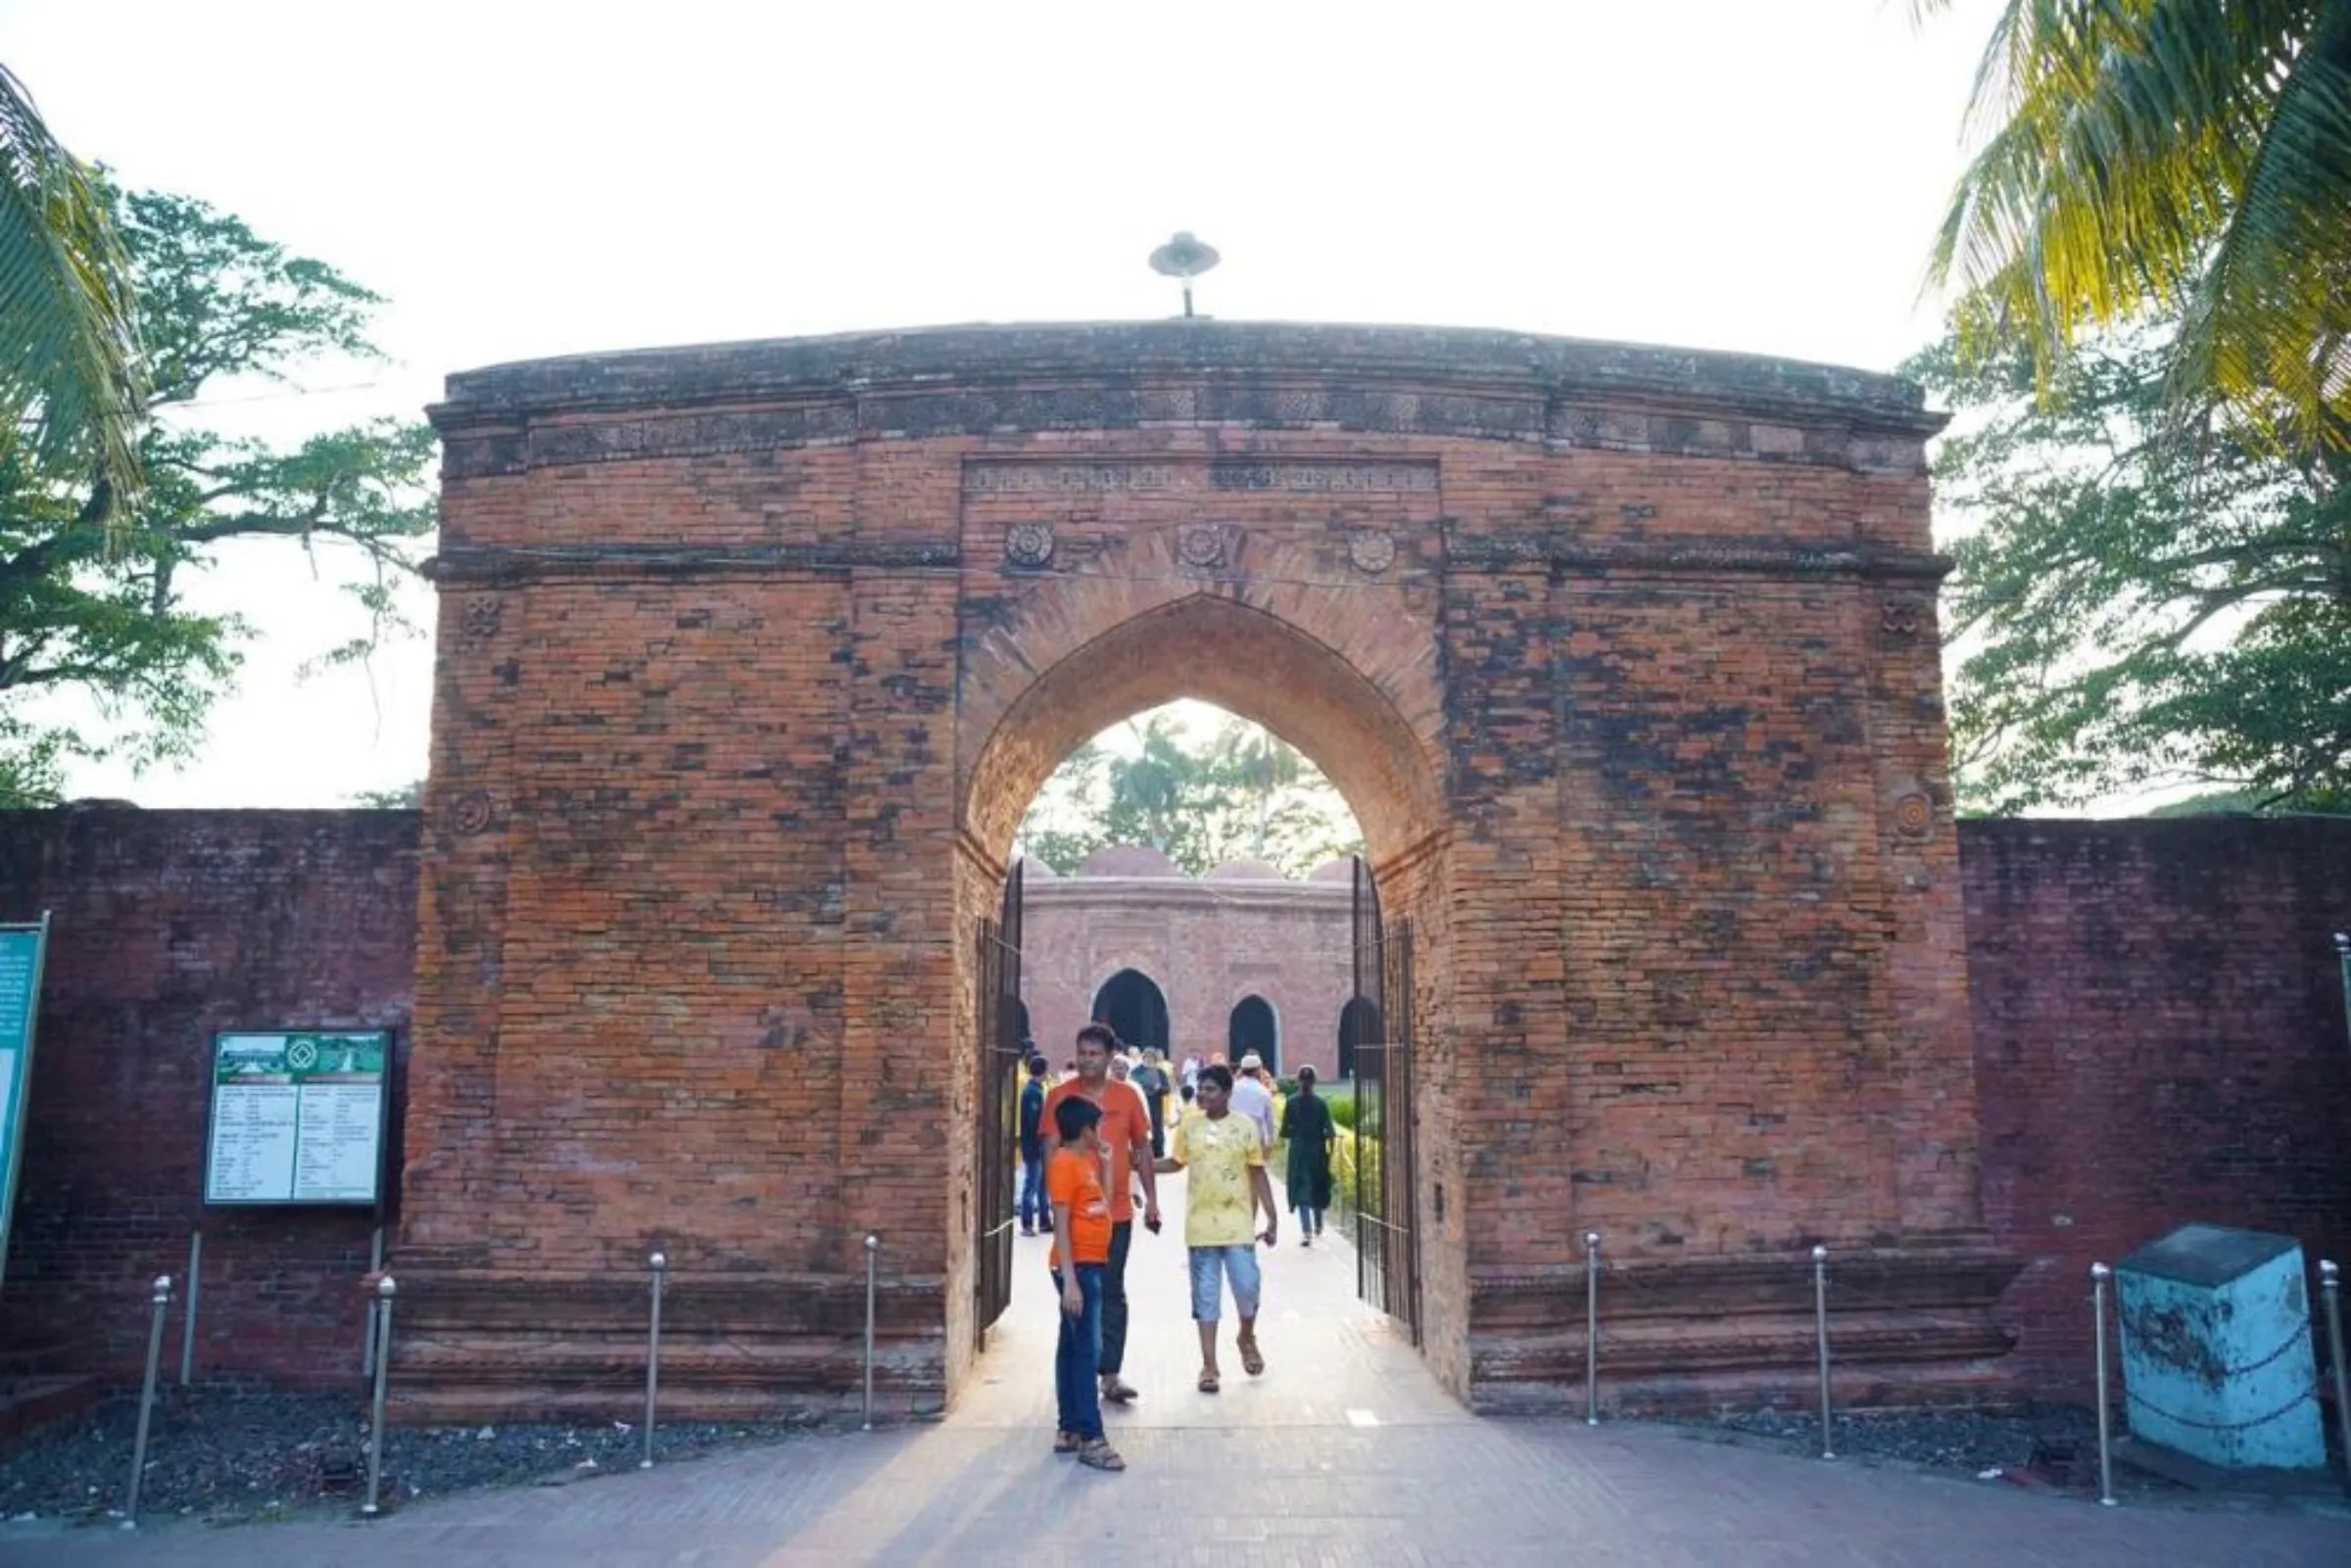 The main entry gate for Sixty Dome Mosque, part of the Mosque City, a UNESCO World Heritage Site in Bagherhat, in southern Bangladesh, May 4, 2022